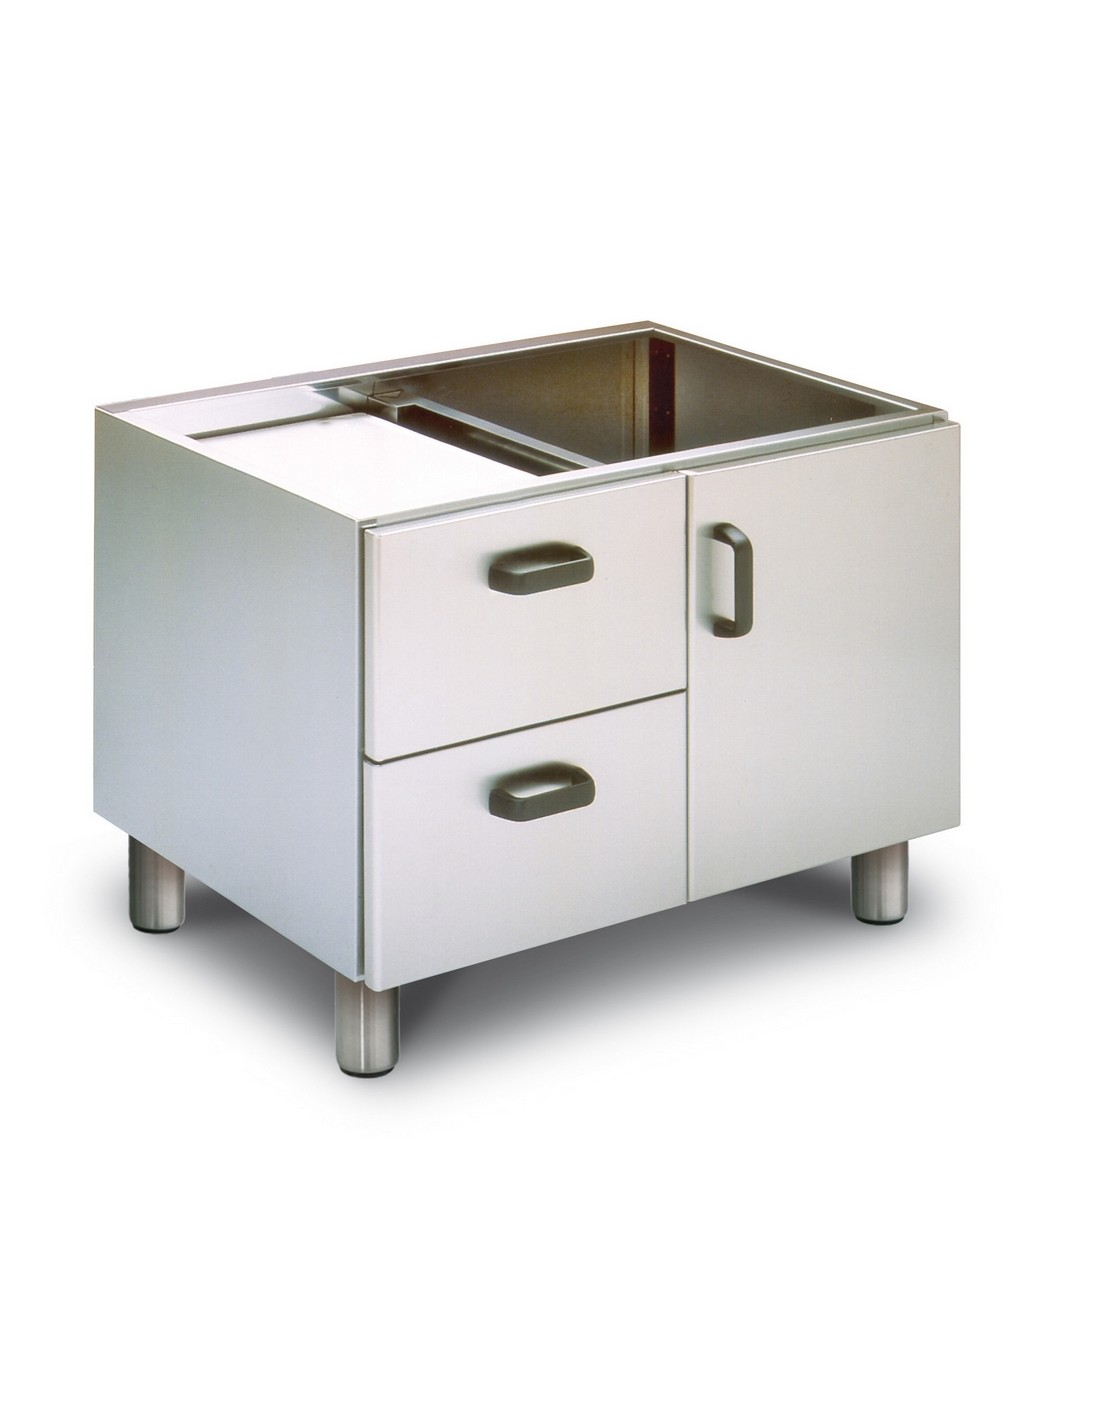 Base unit with door and drawers - N°2 x GN 1/1 h 15 - Plastic - Dimensions 80 x 61.5 x 60h cm